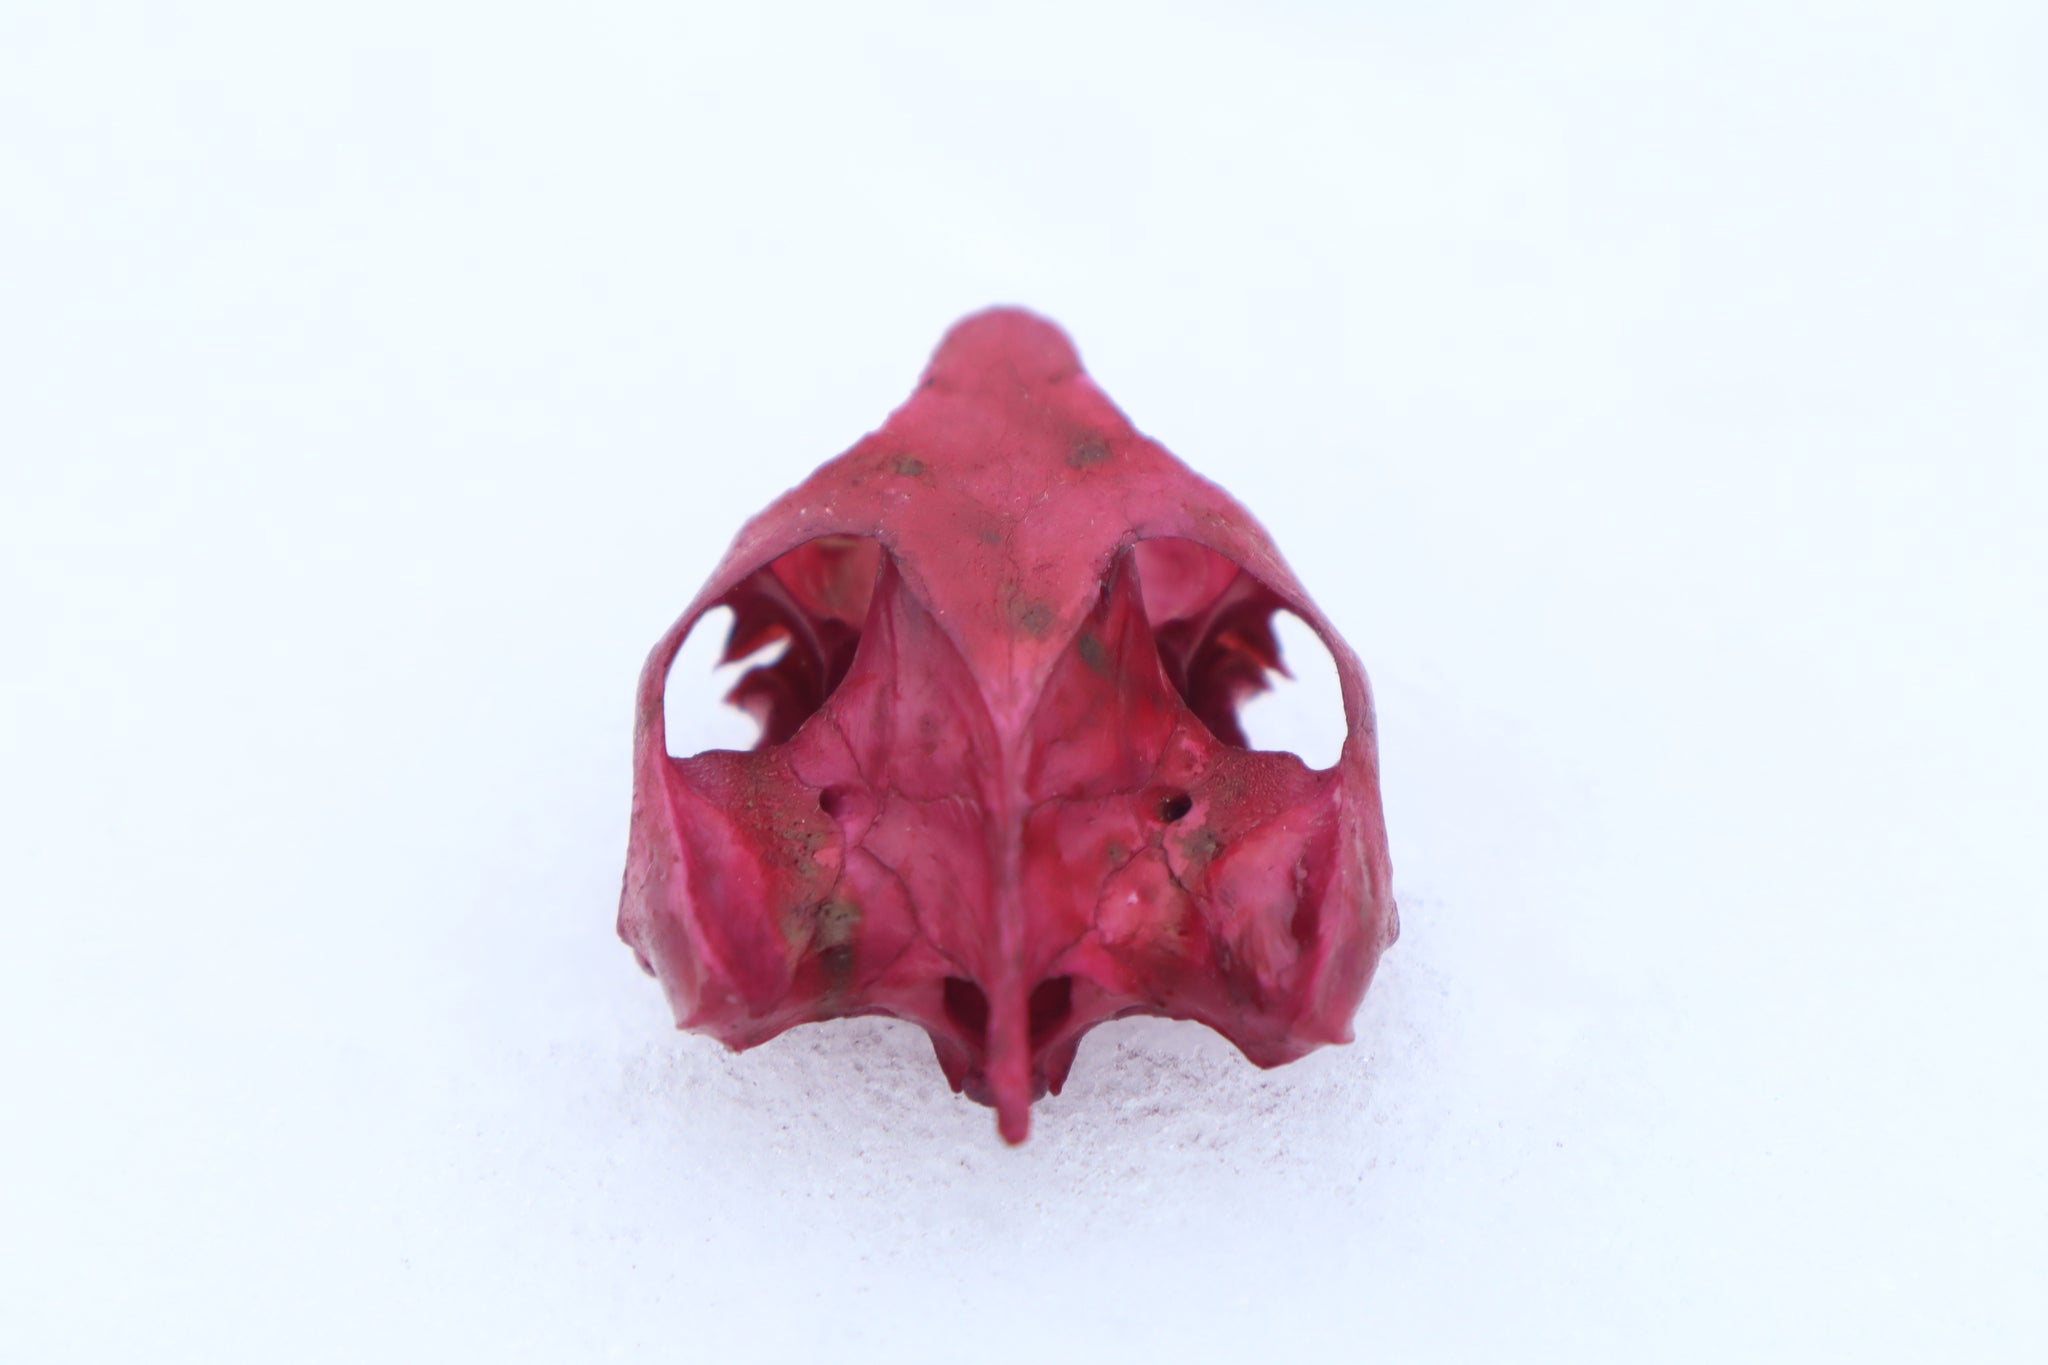 Naturally Stained Red Eared Slider Turtle Skull